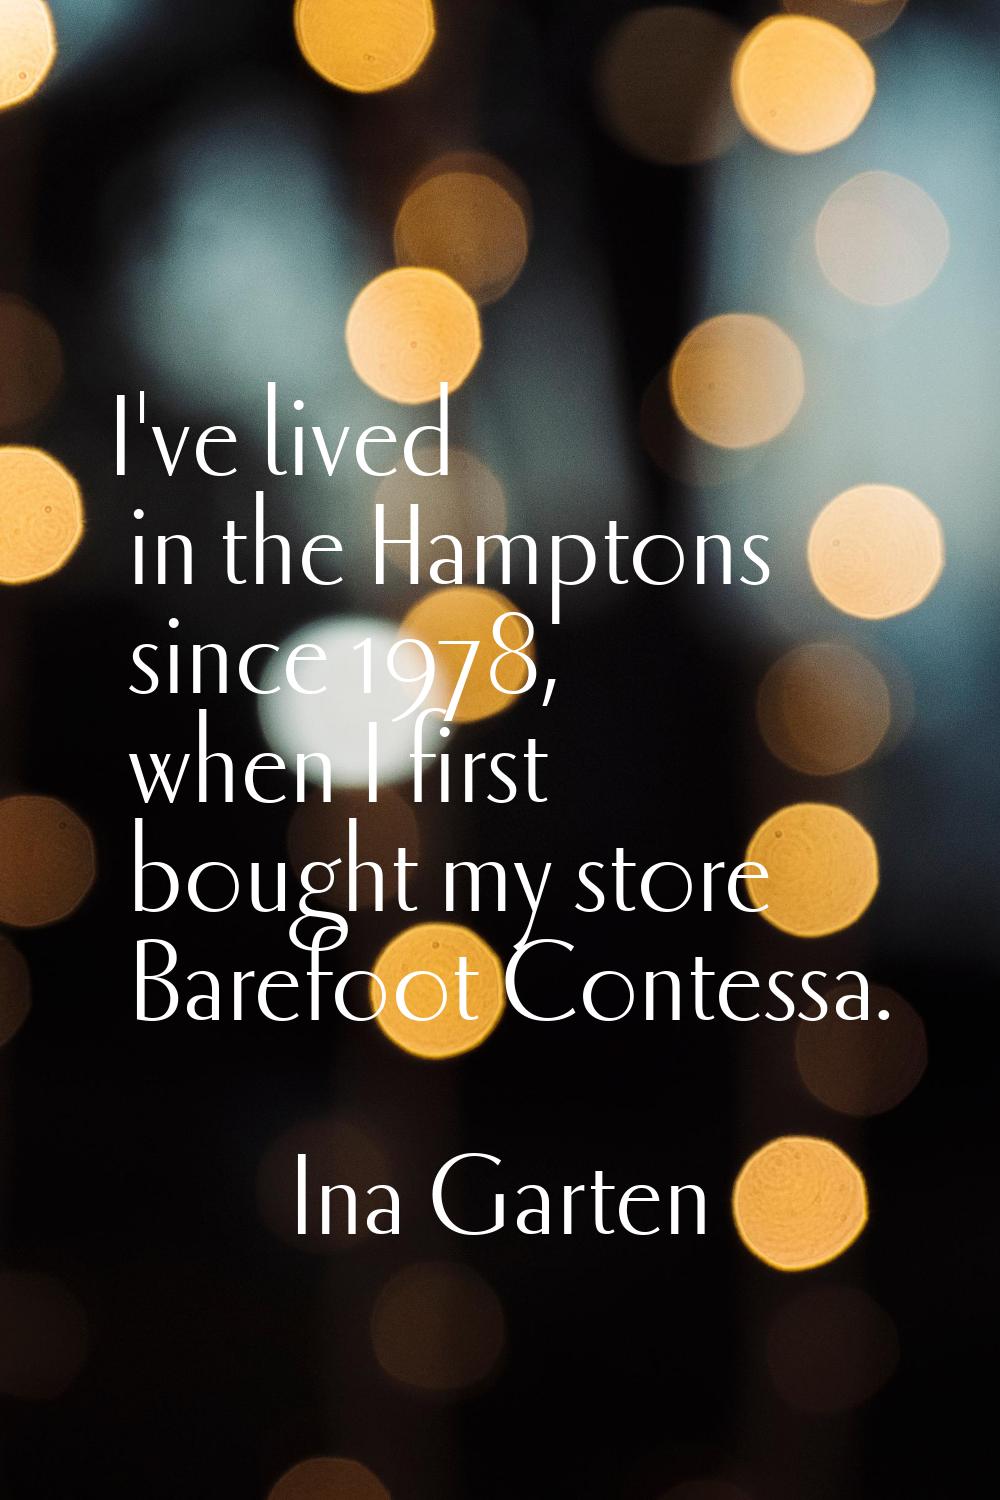 I've lived in the Hamptons since 1978, when I first bought my store Barefoot Contessa.